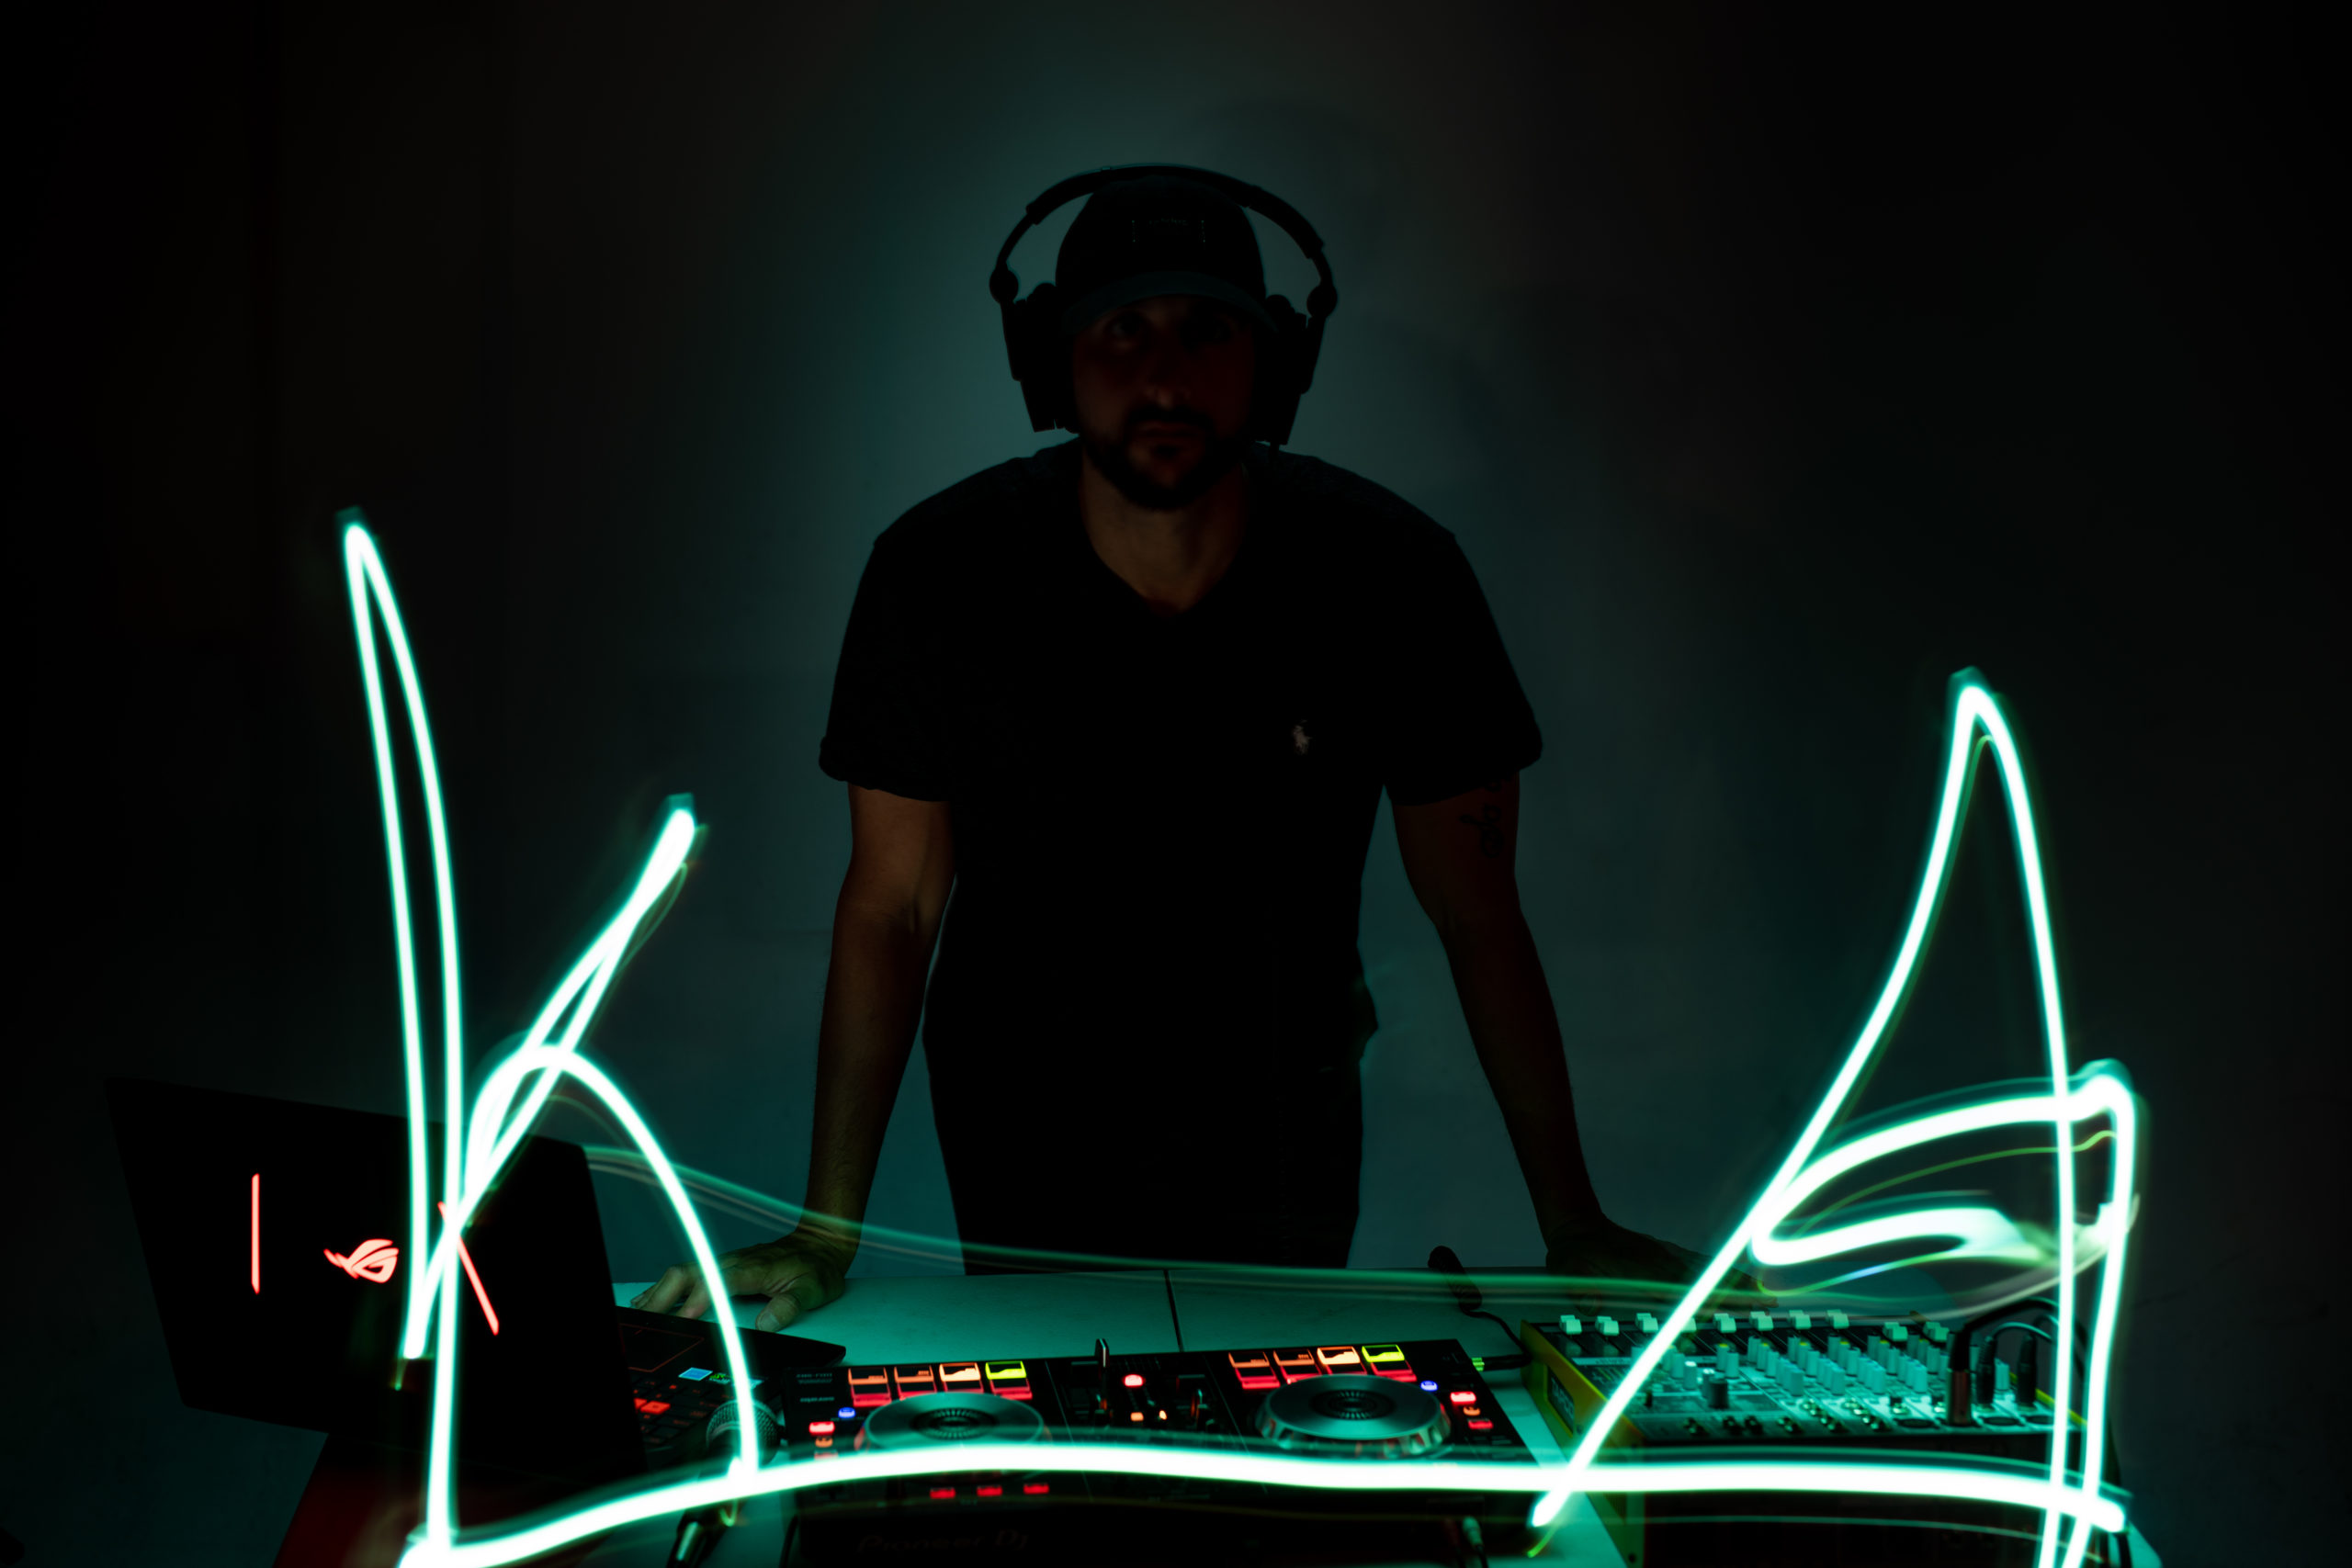 The importance of 3d animations-Male standing with black hat, beard and clothes looking towards camera behind a DJ machine with green neon lights. He is wearing headphones.